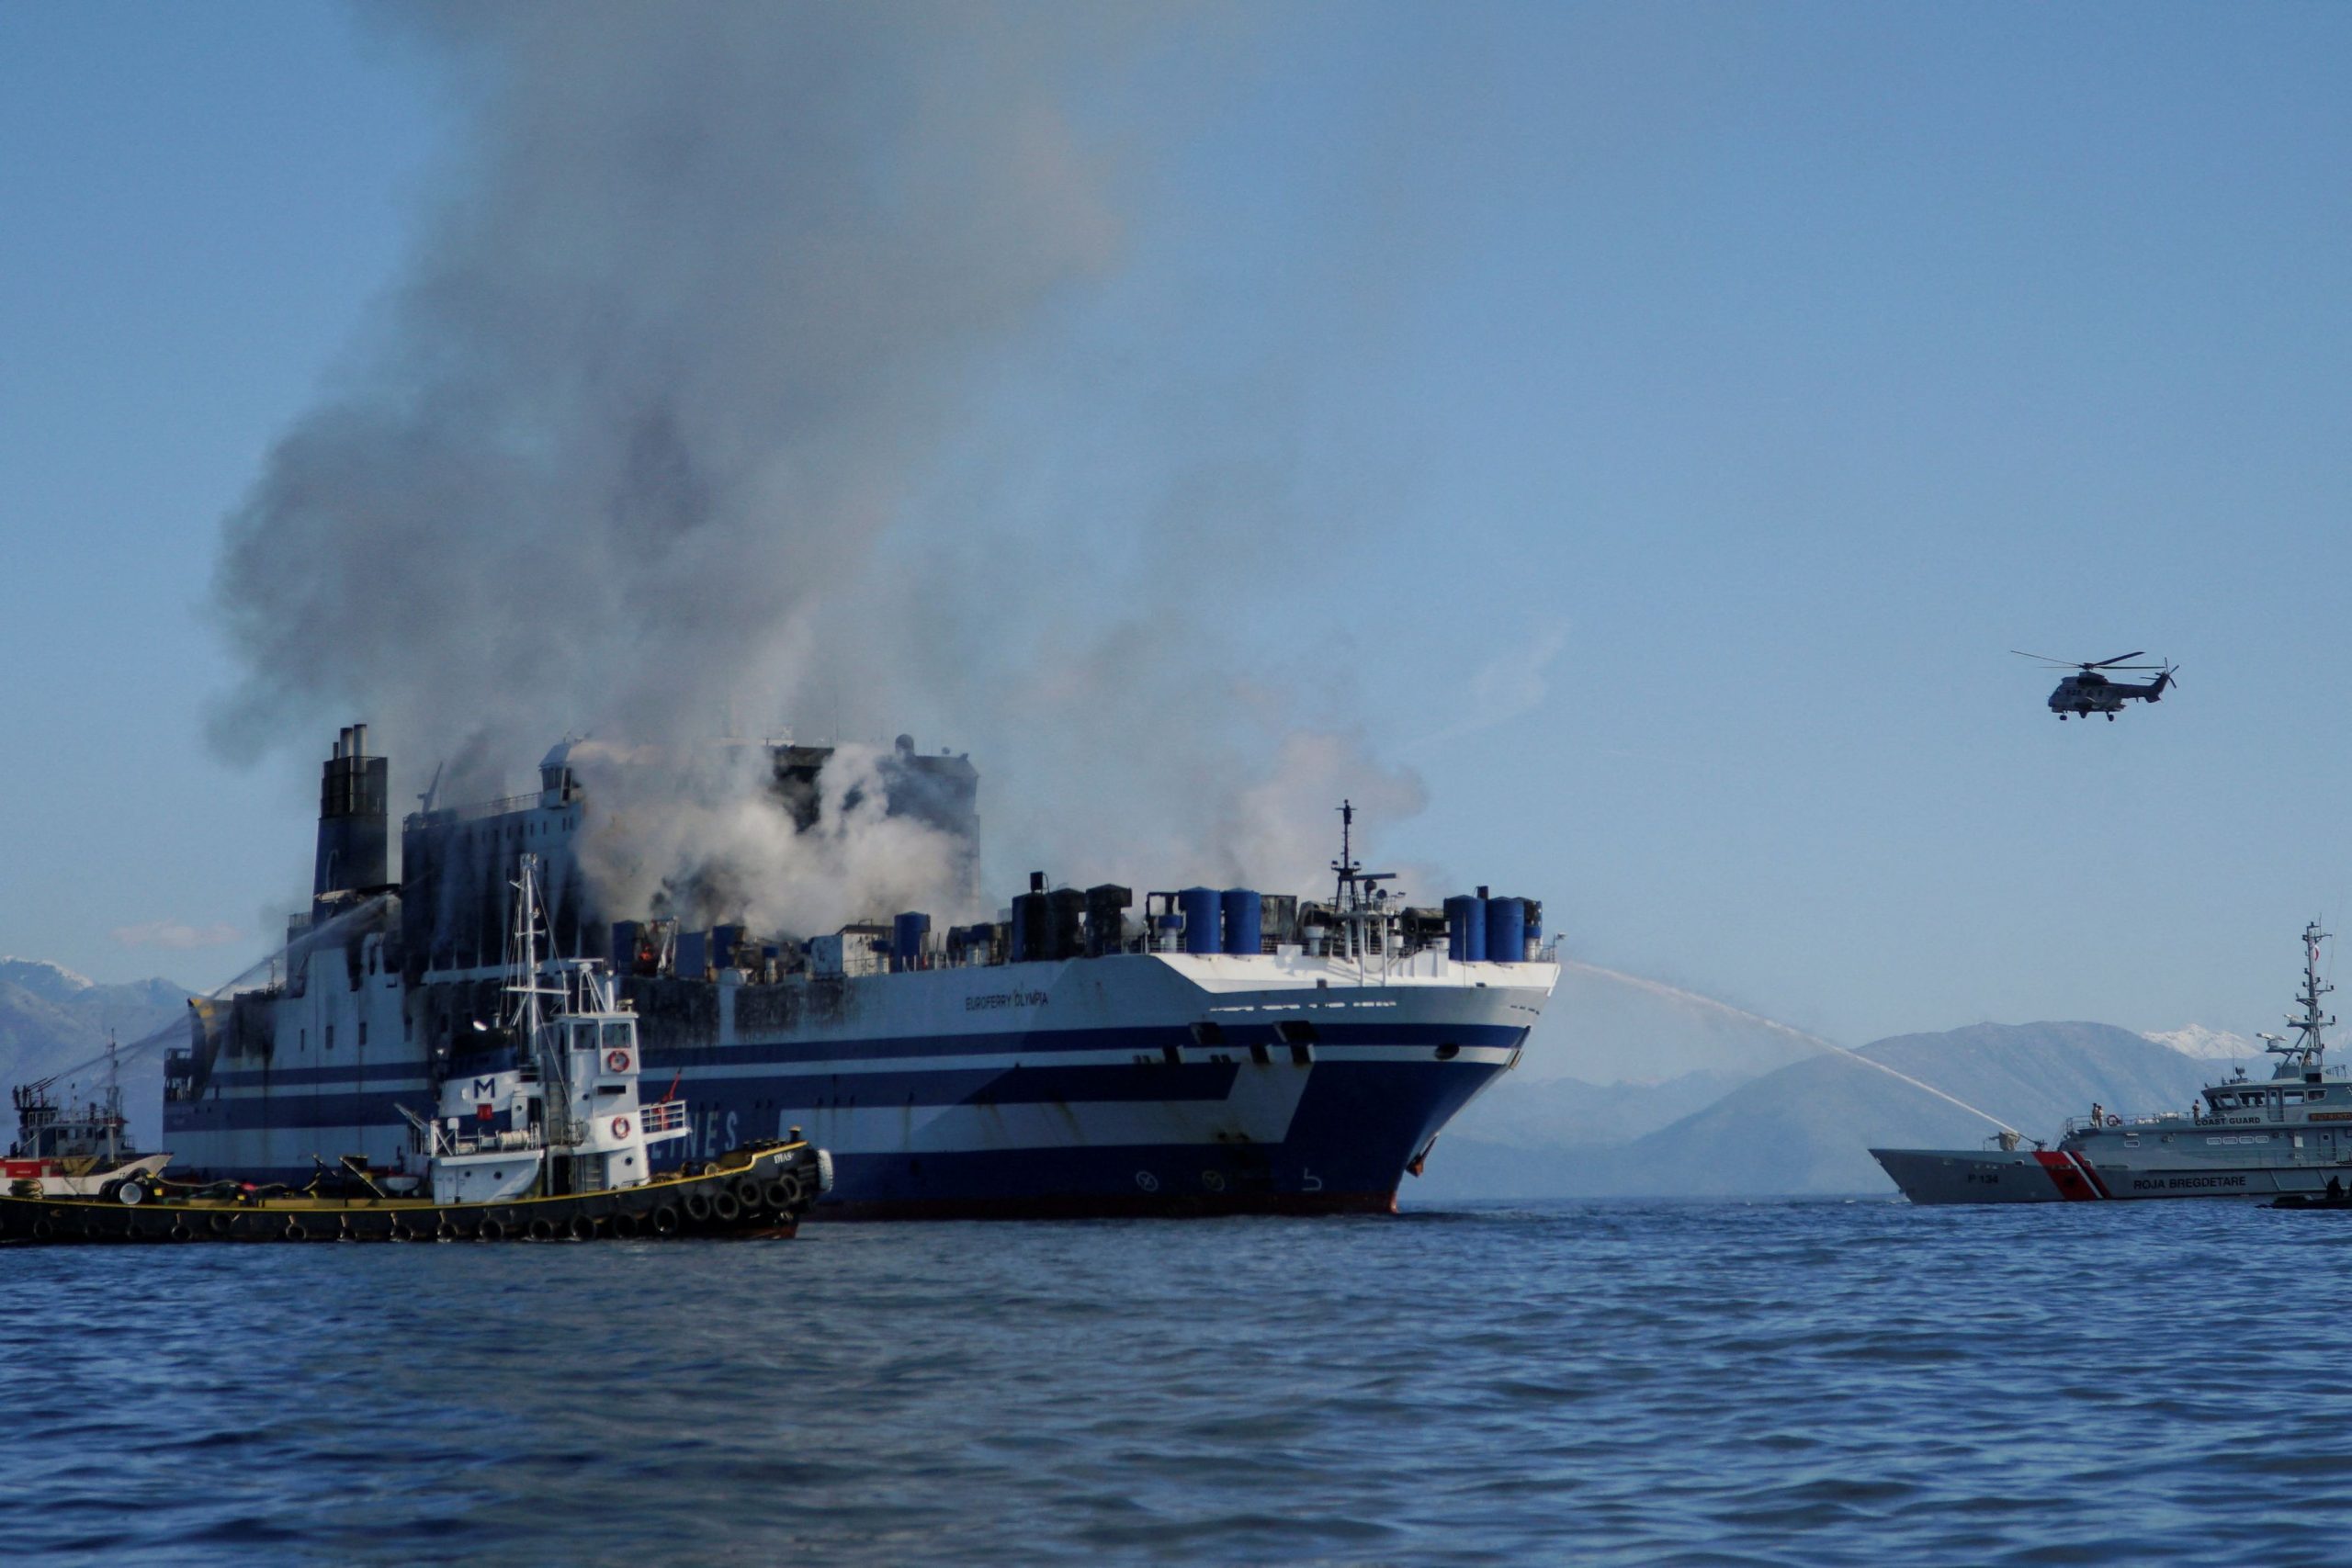 Greece – Euroferry Olympia: Two trapped passengers rescued from garage of burning ferry boat